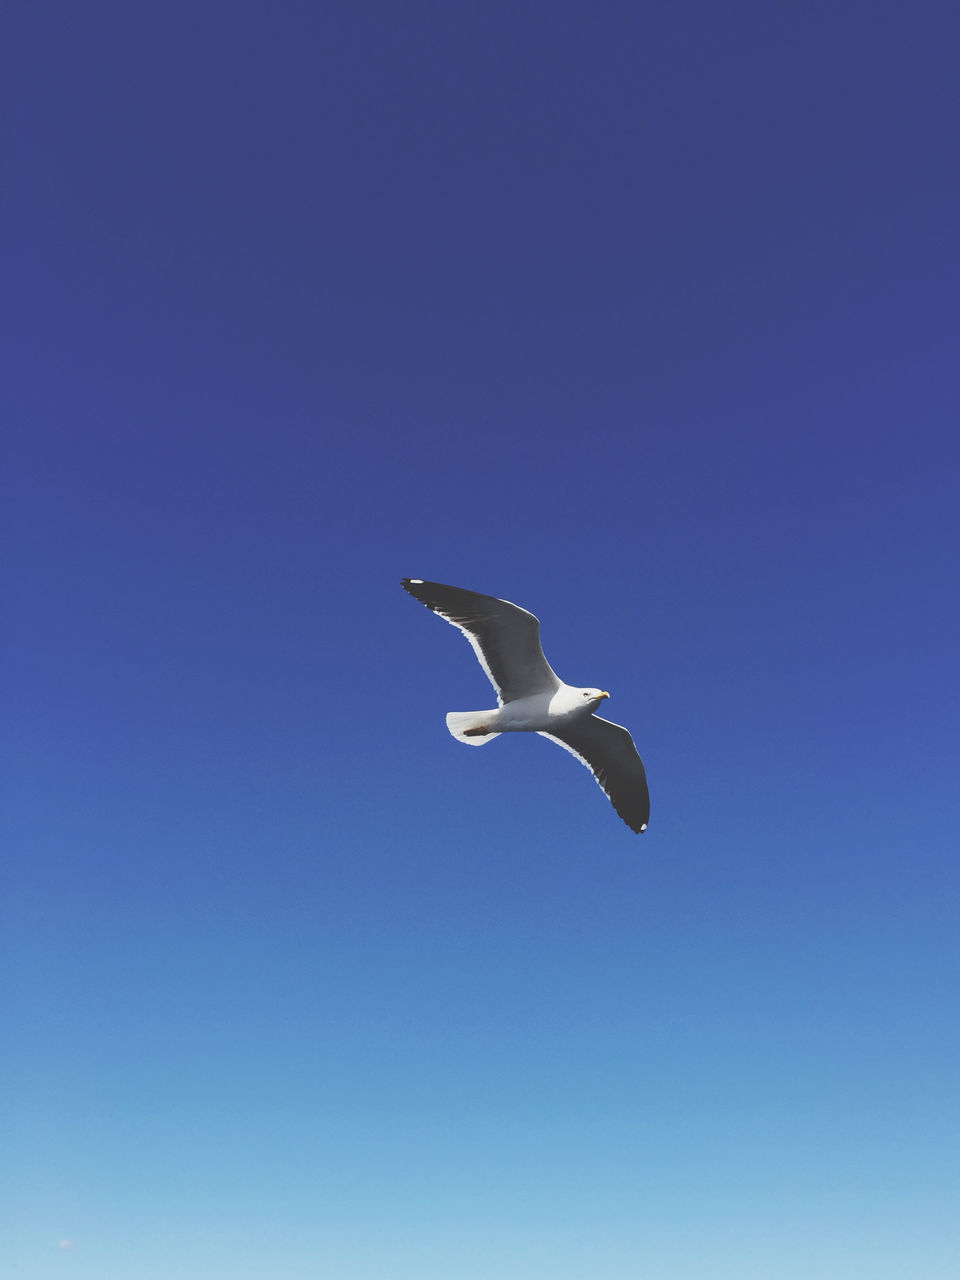 flying, animal themes, animal, animal wildlife, wildlife, blue, bird, one animal, sky, gull, spread wings, mid-air, seabird, clear sky, nature, low angle view, copy space, no people, animal body part, wing, motion, seagull, outdoors, day, beauty in nature, sunny, animal wing, full length